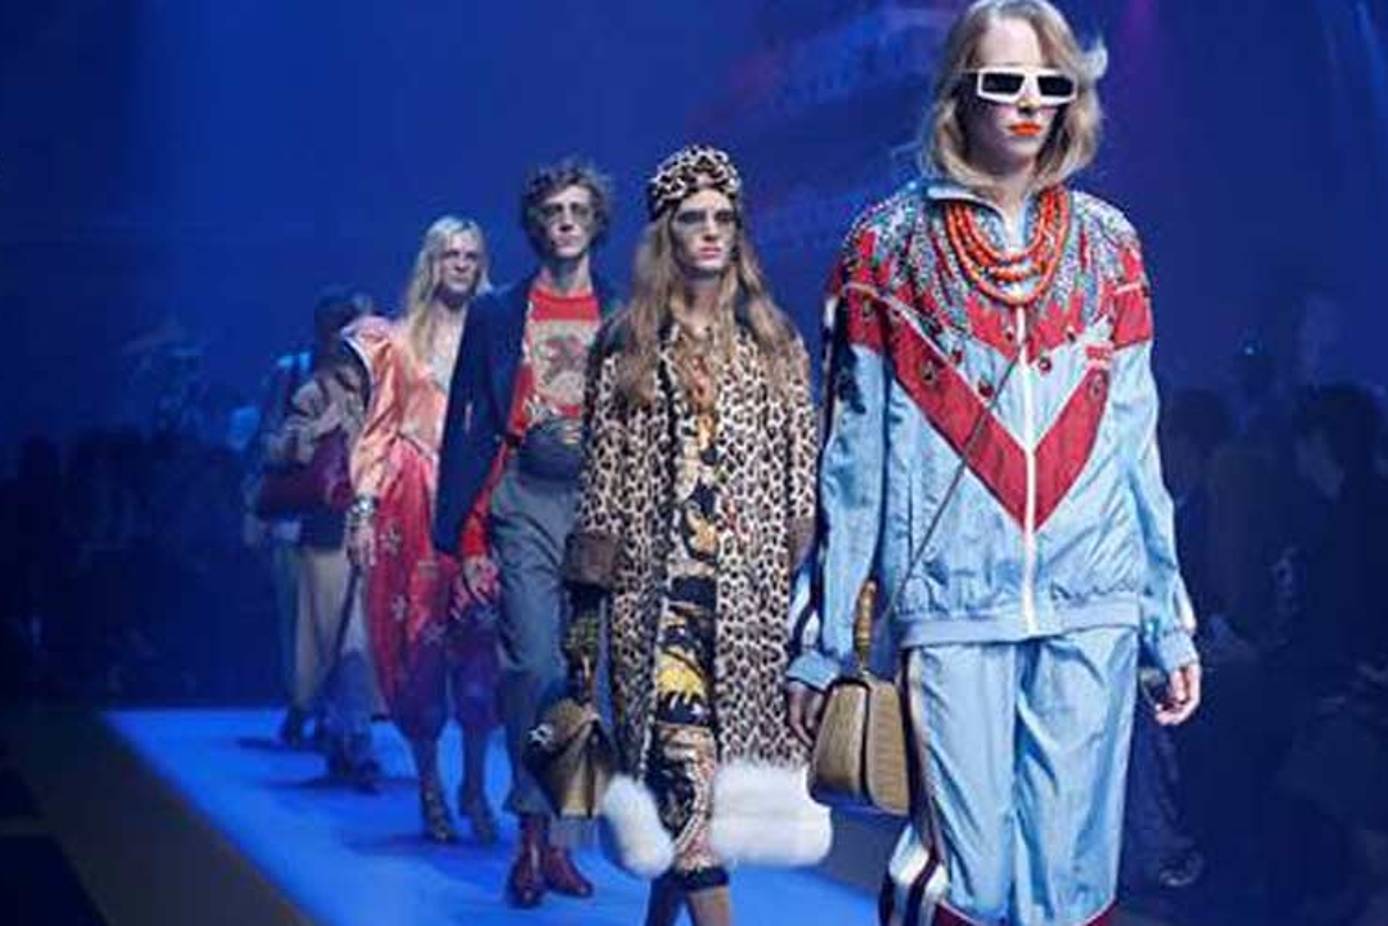 Does Gucci's £1,800 shell suit signal the return of the 1980s